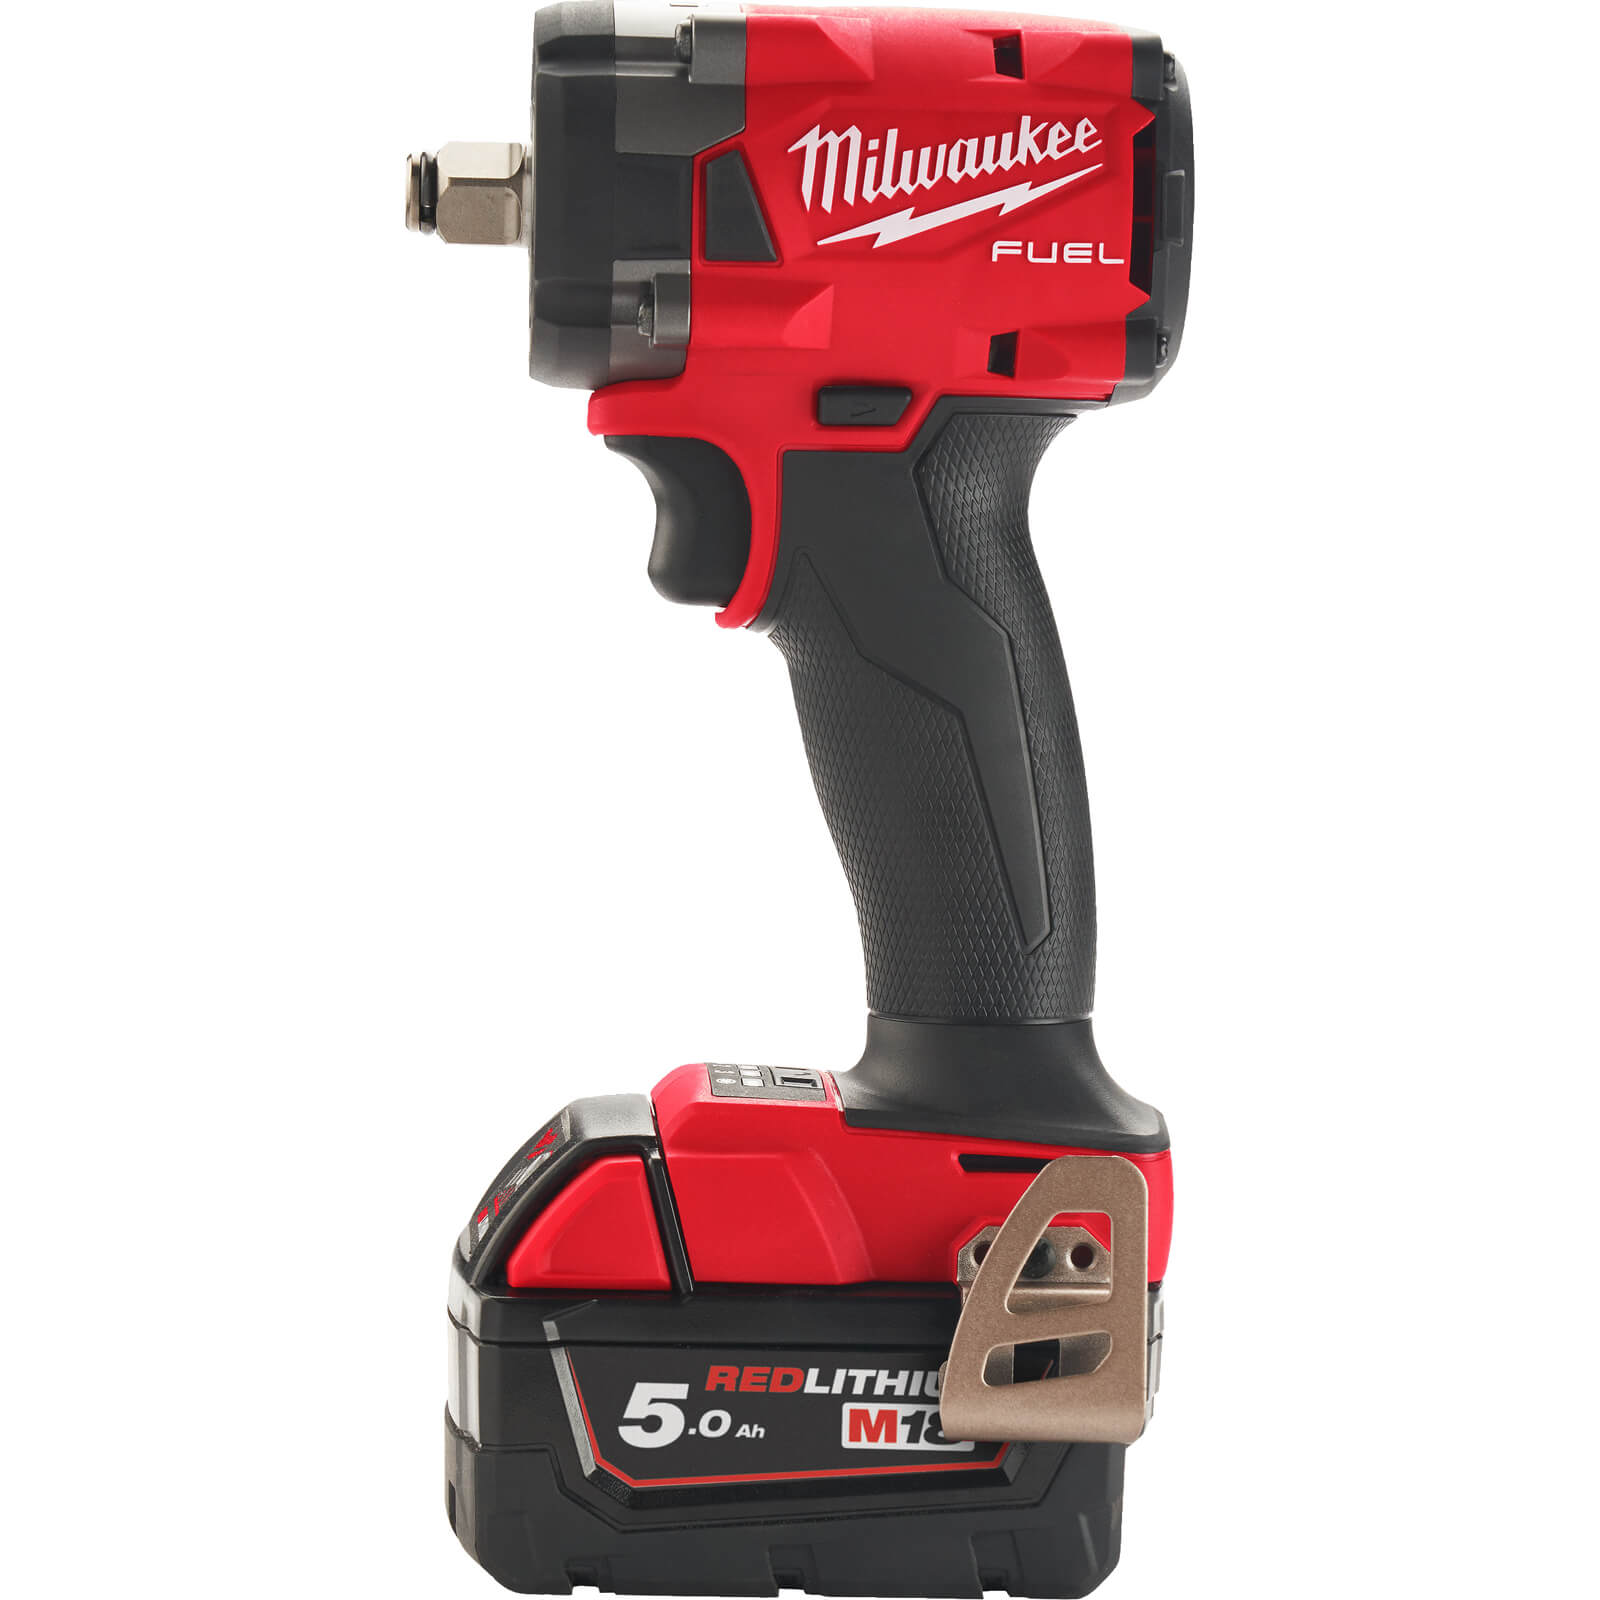 Image of Milwaukee M18 FIW2F12 Fuel 18v Cordless Brushless 1/2" Drive Impact Wrench 2 x 5ah Li-ion Charger Case